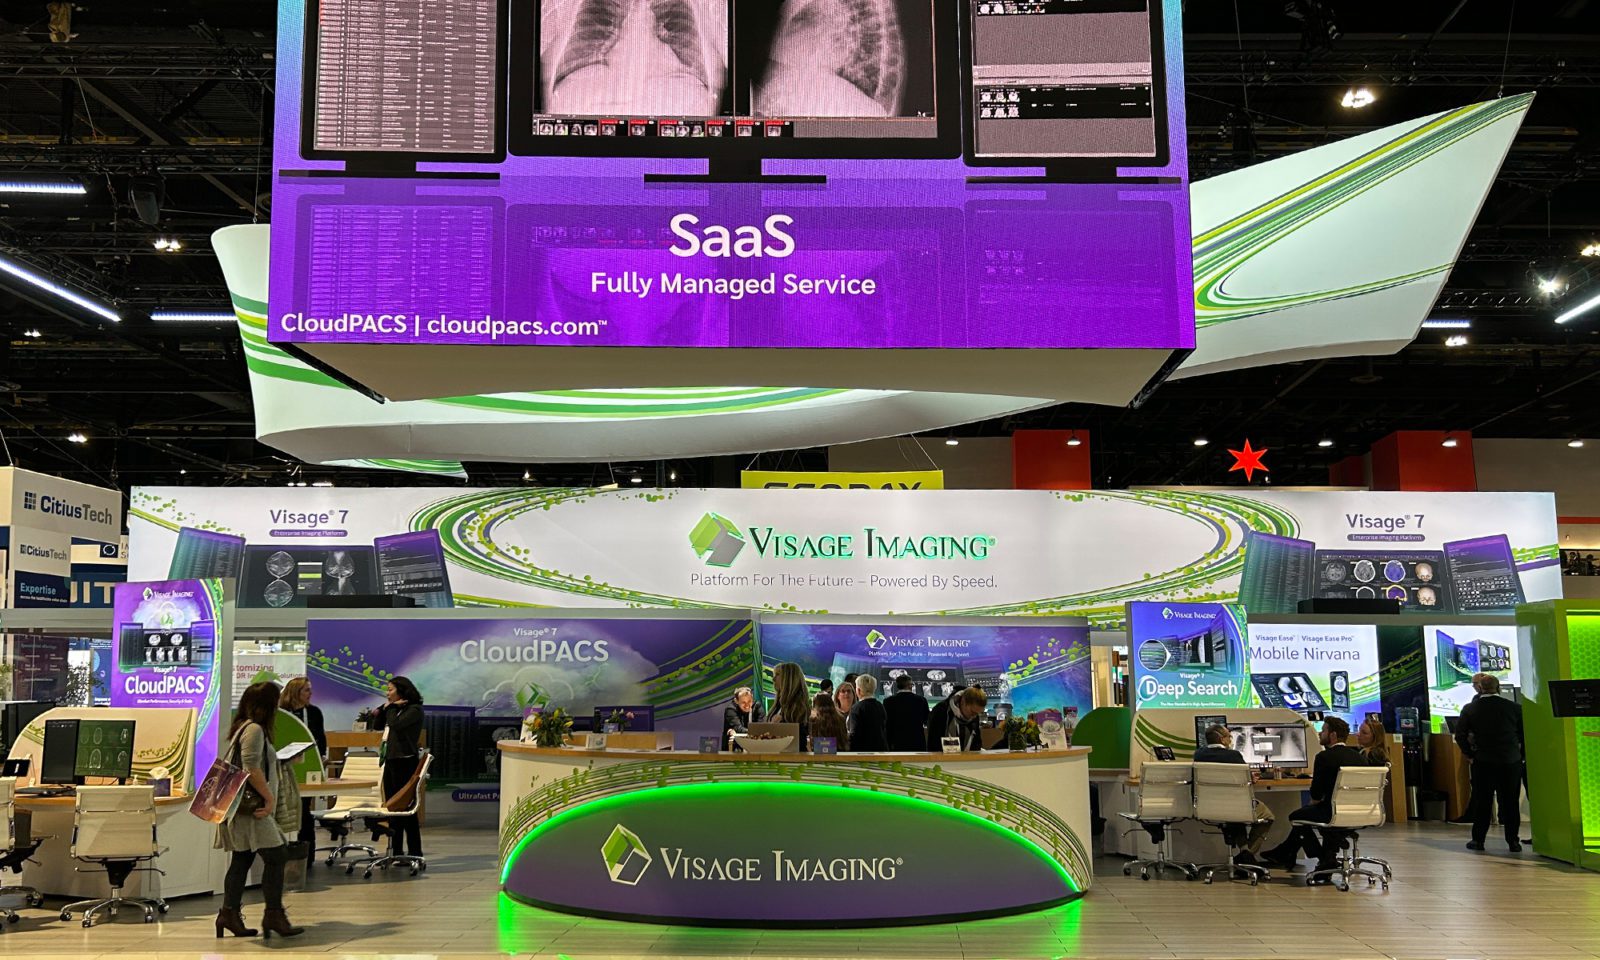 Visage Imaging's glowing, green booth